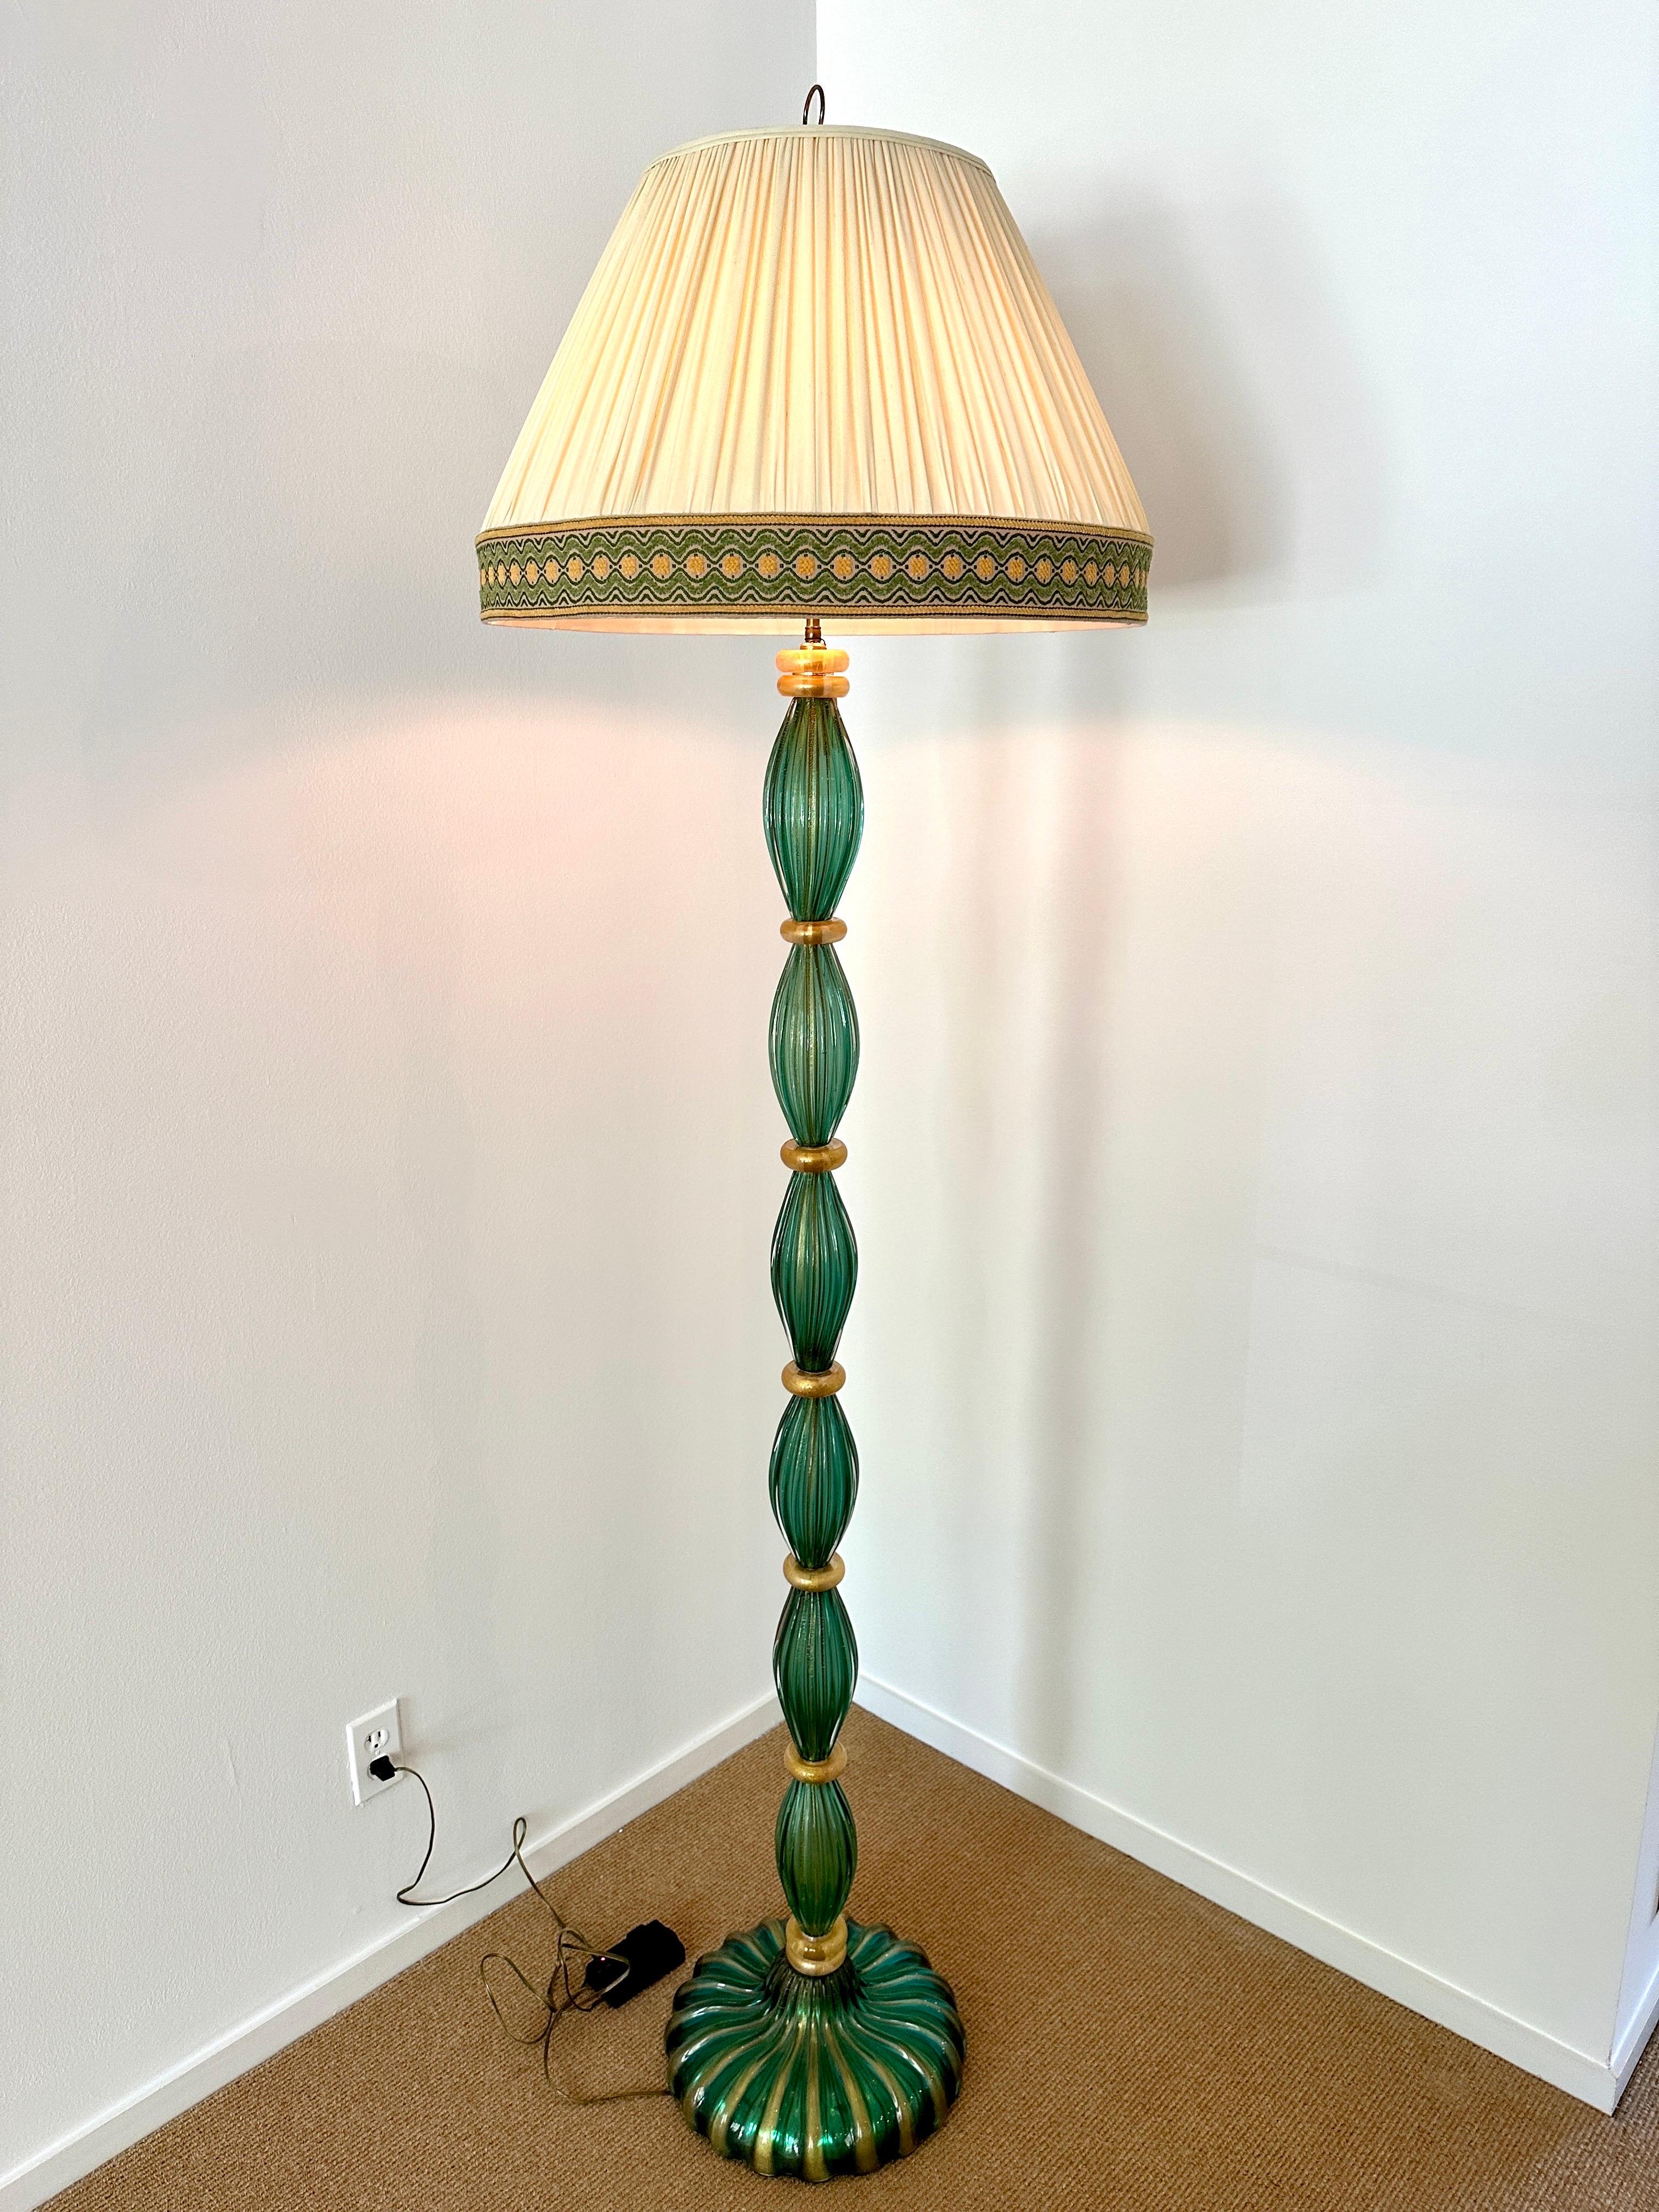 Vintage Barovier Green Murano Glass Floor Lamp w/ Gold Foil Inclusions For Sale 1